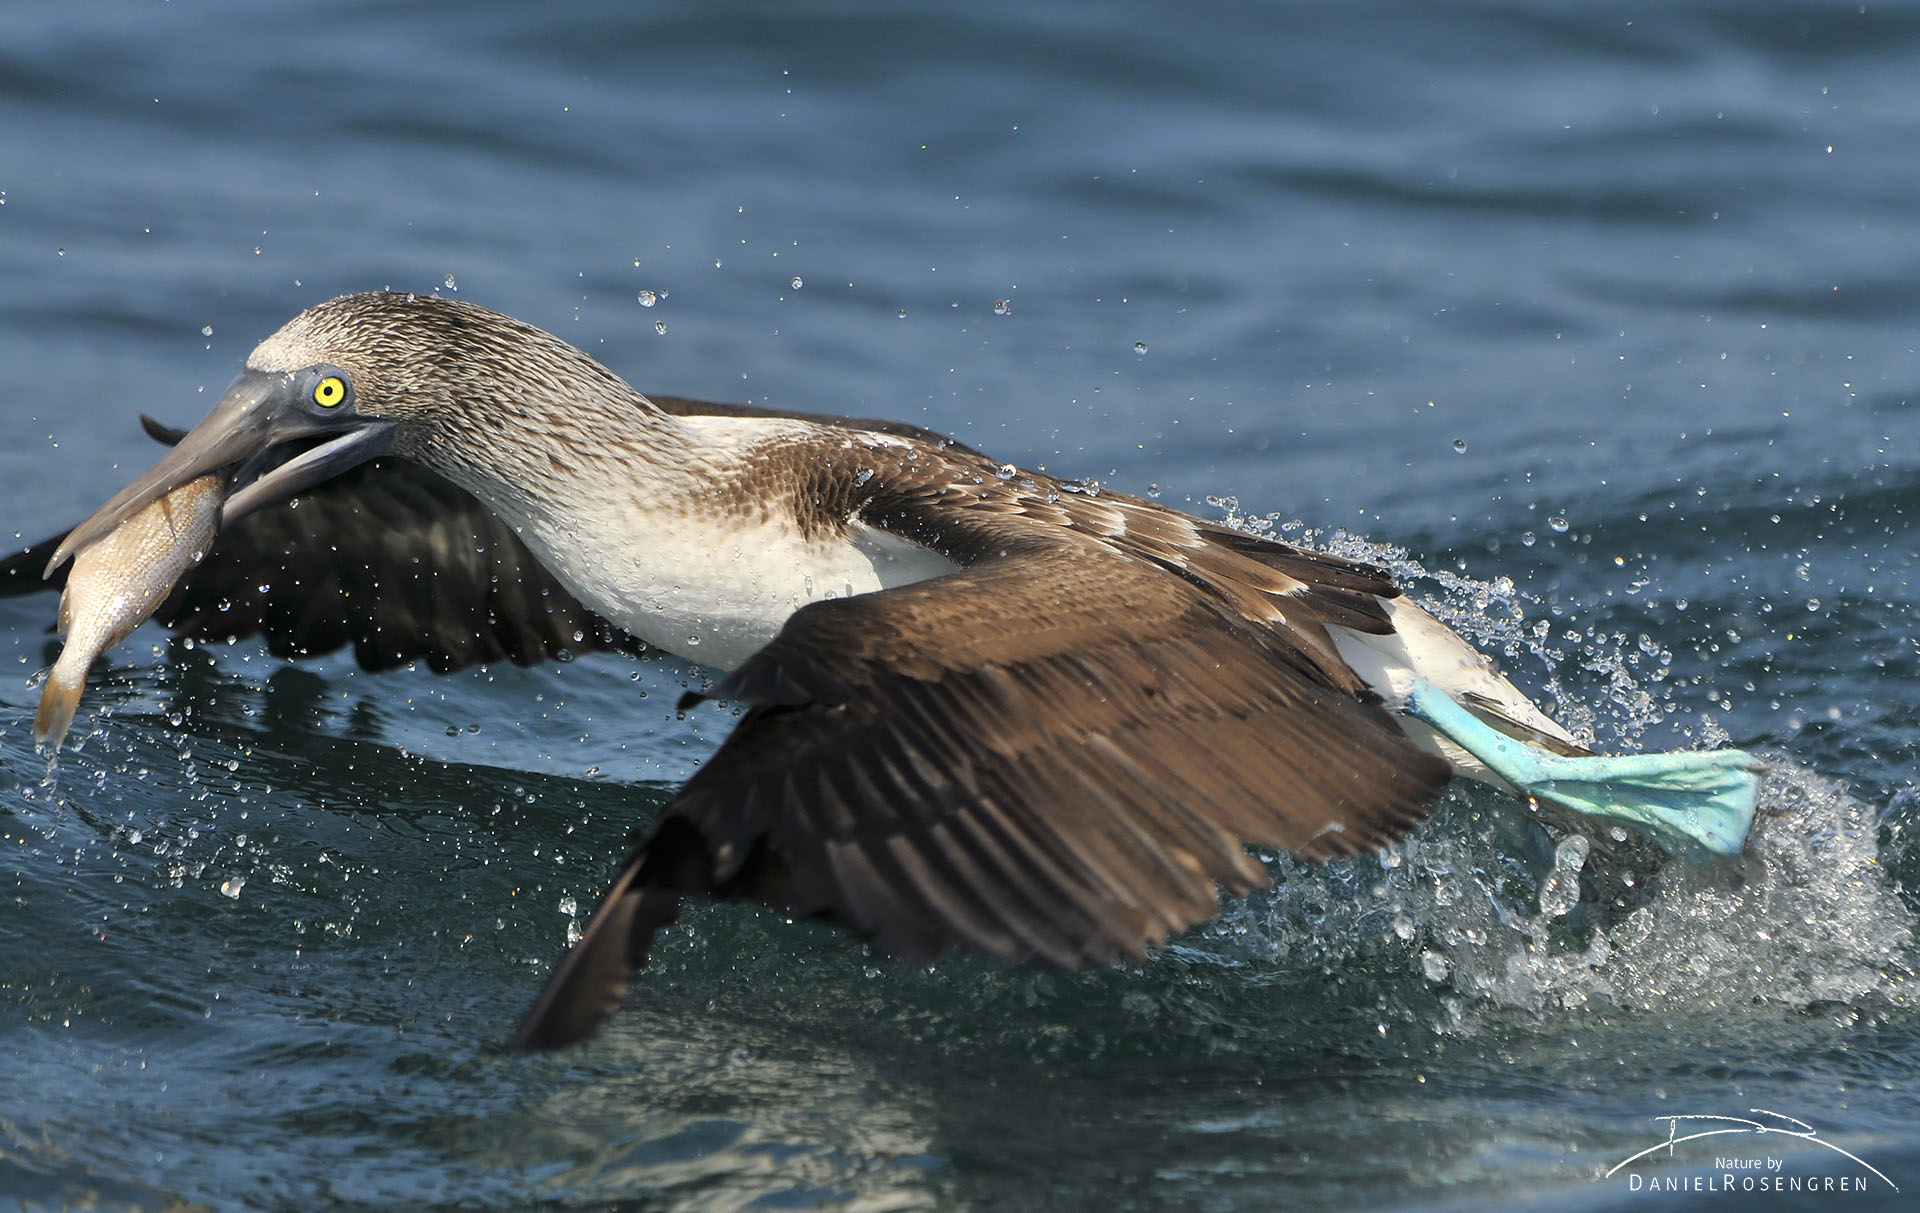 A Blue-footed booby taking off with a fish. © Daniel Rosengren